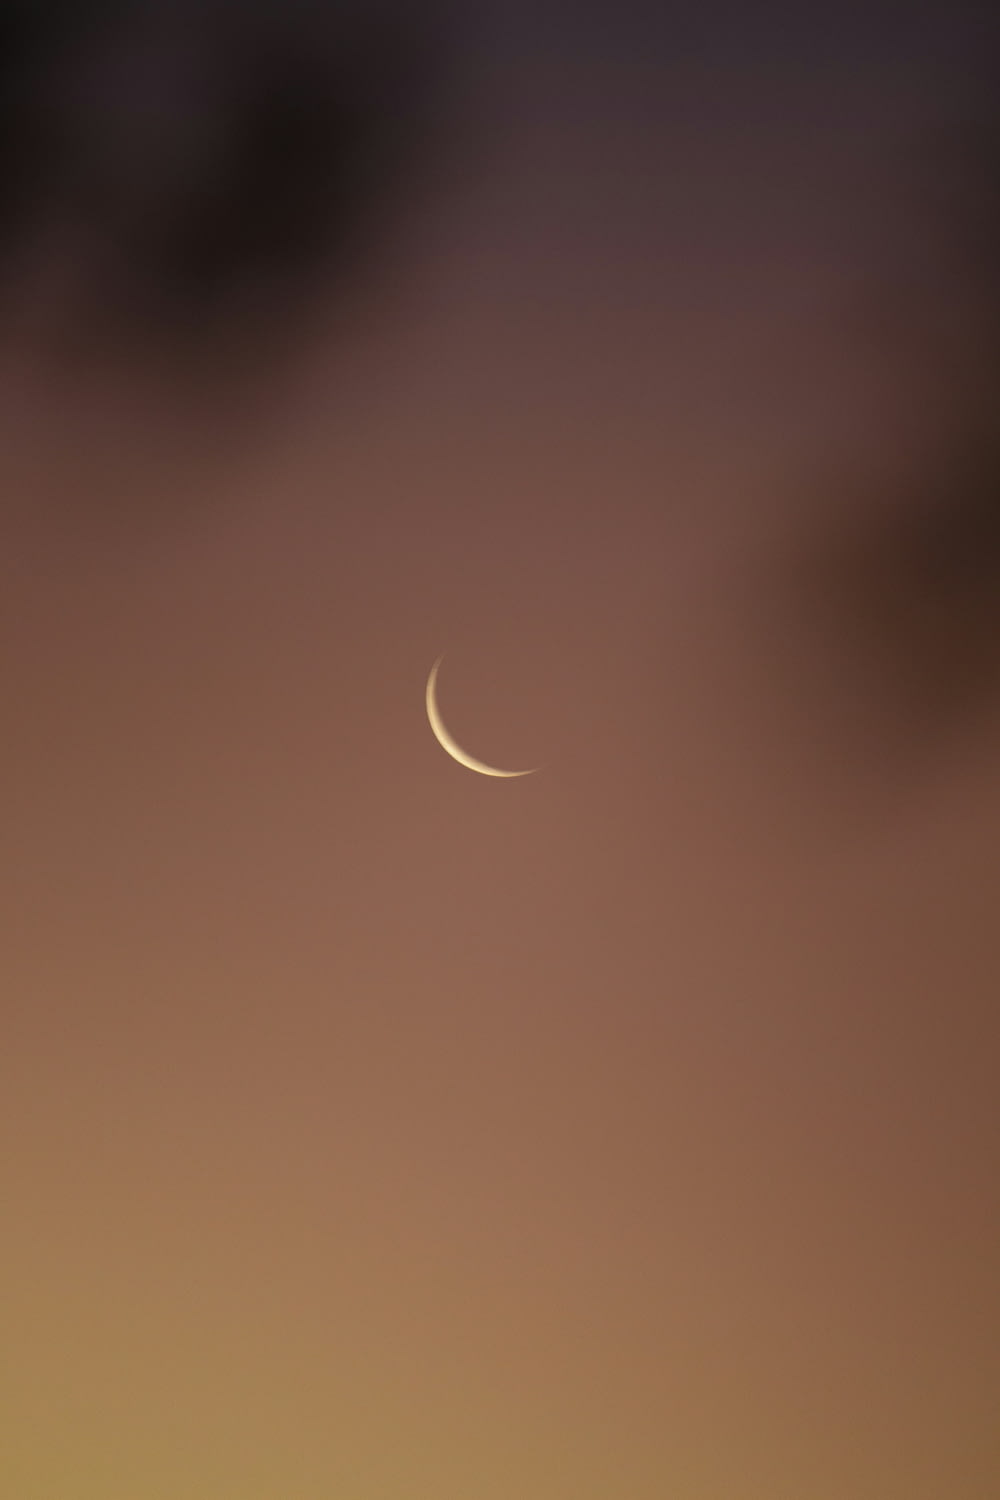 a crescent is seen in the sky at dusk